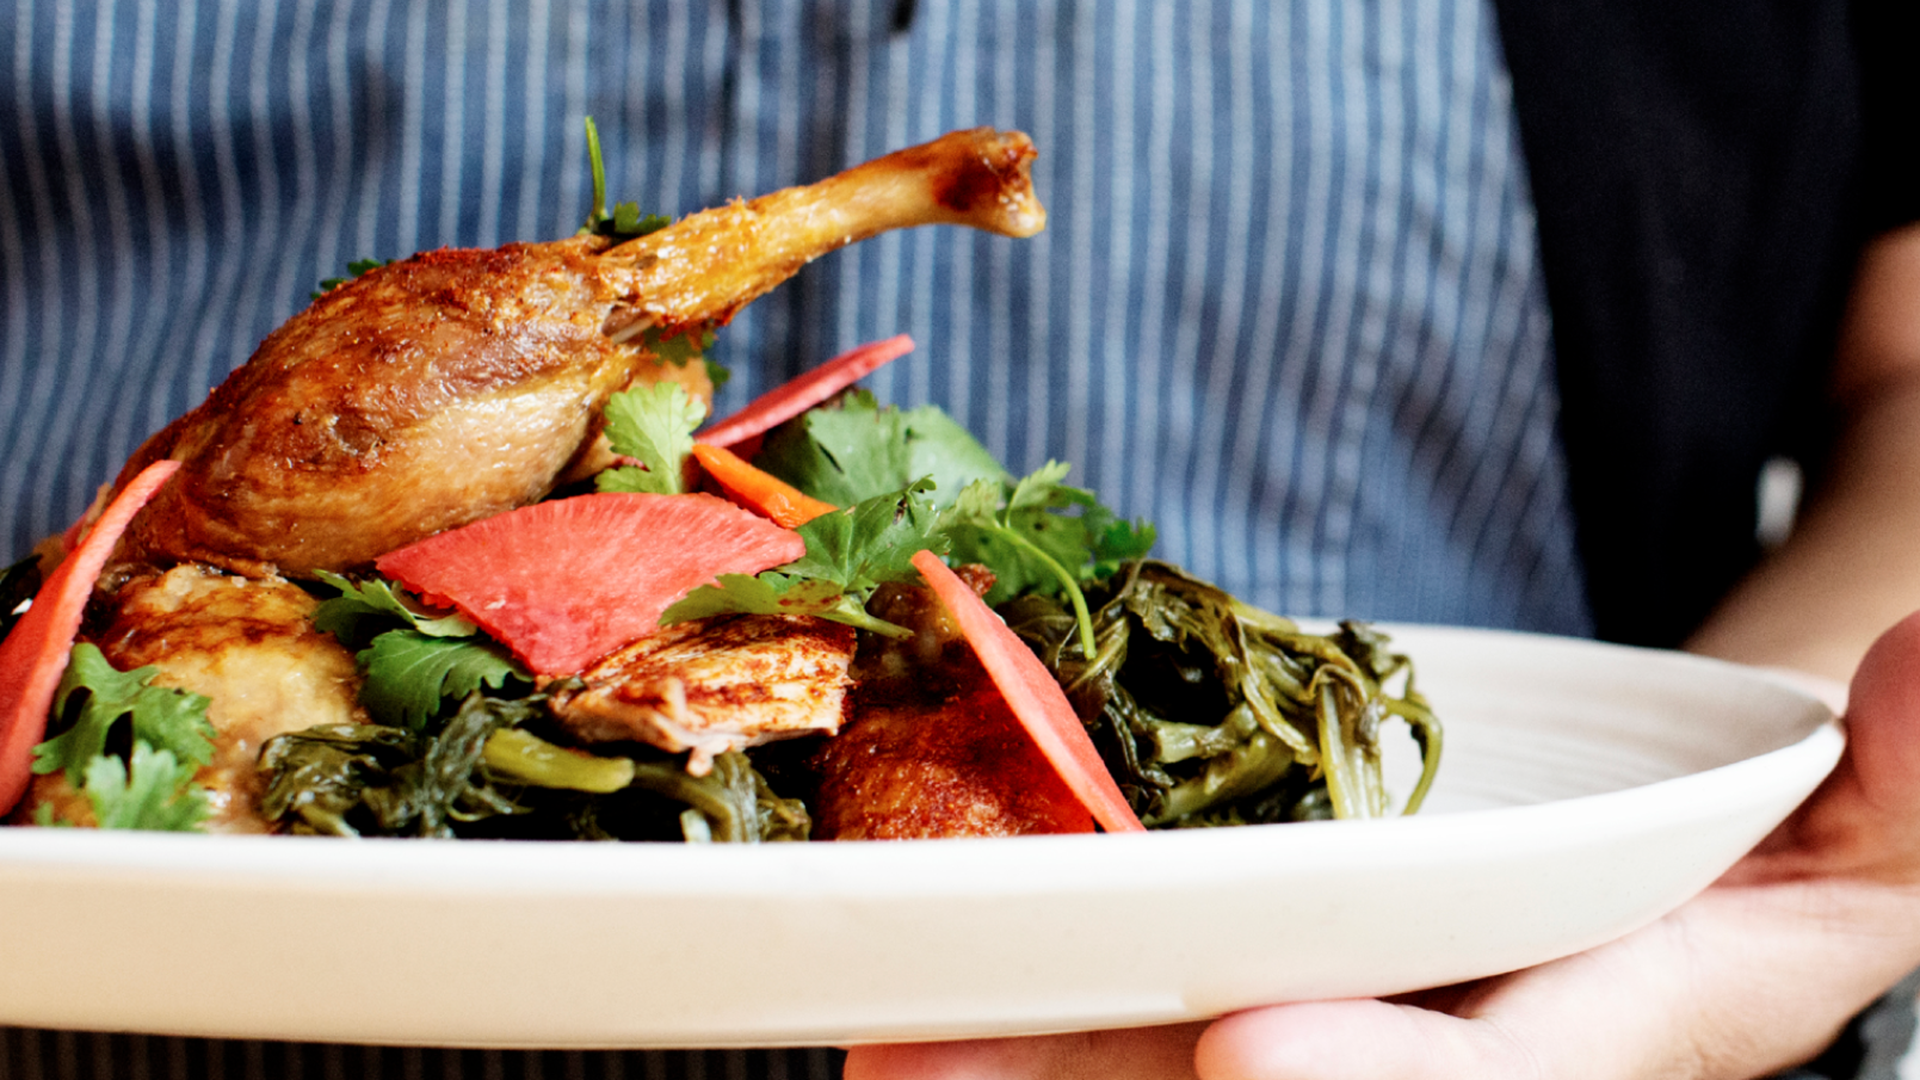 A person holding a plate of food with greens and a cooked chicken leg on top.